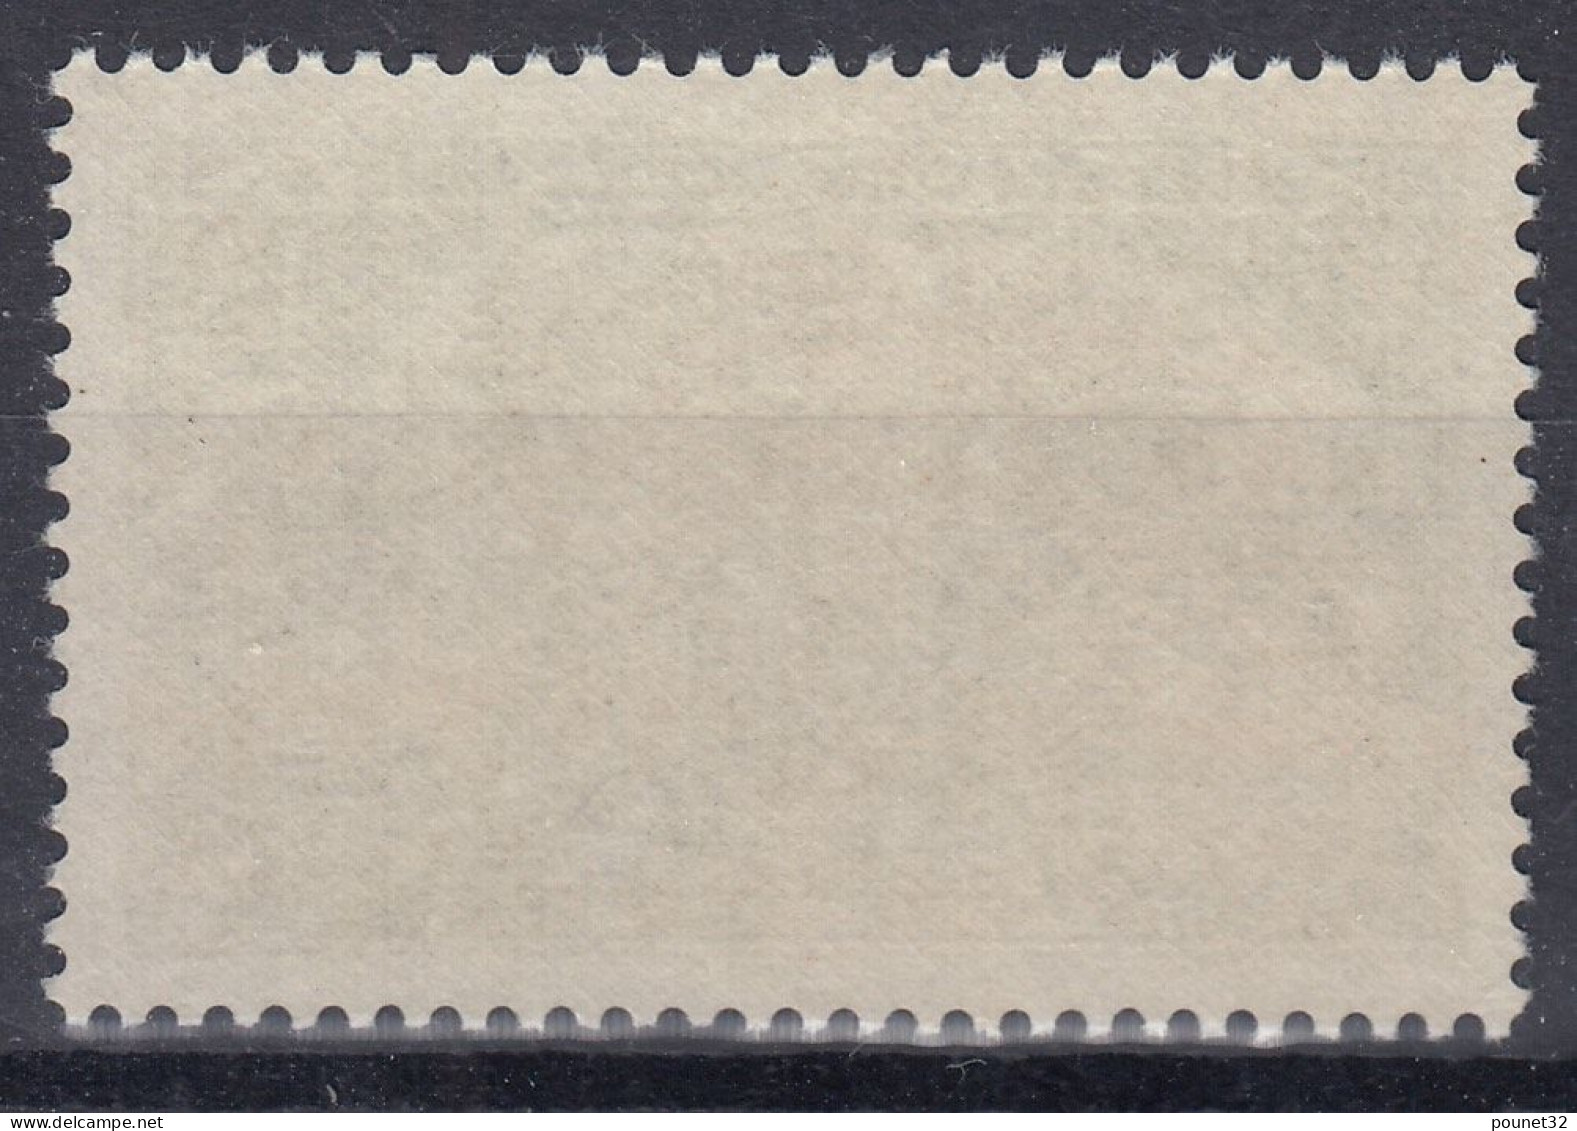 TIMBRE TAAF PHYLICA DE L' ILE AMSTERDAM N° 29 NEUF ** GOMME SANS CHARNIERE - Unused Stamps